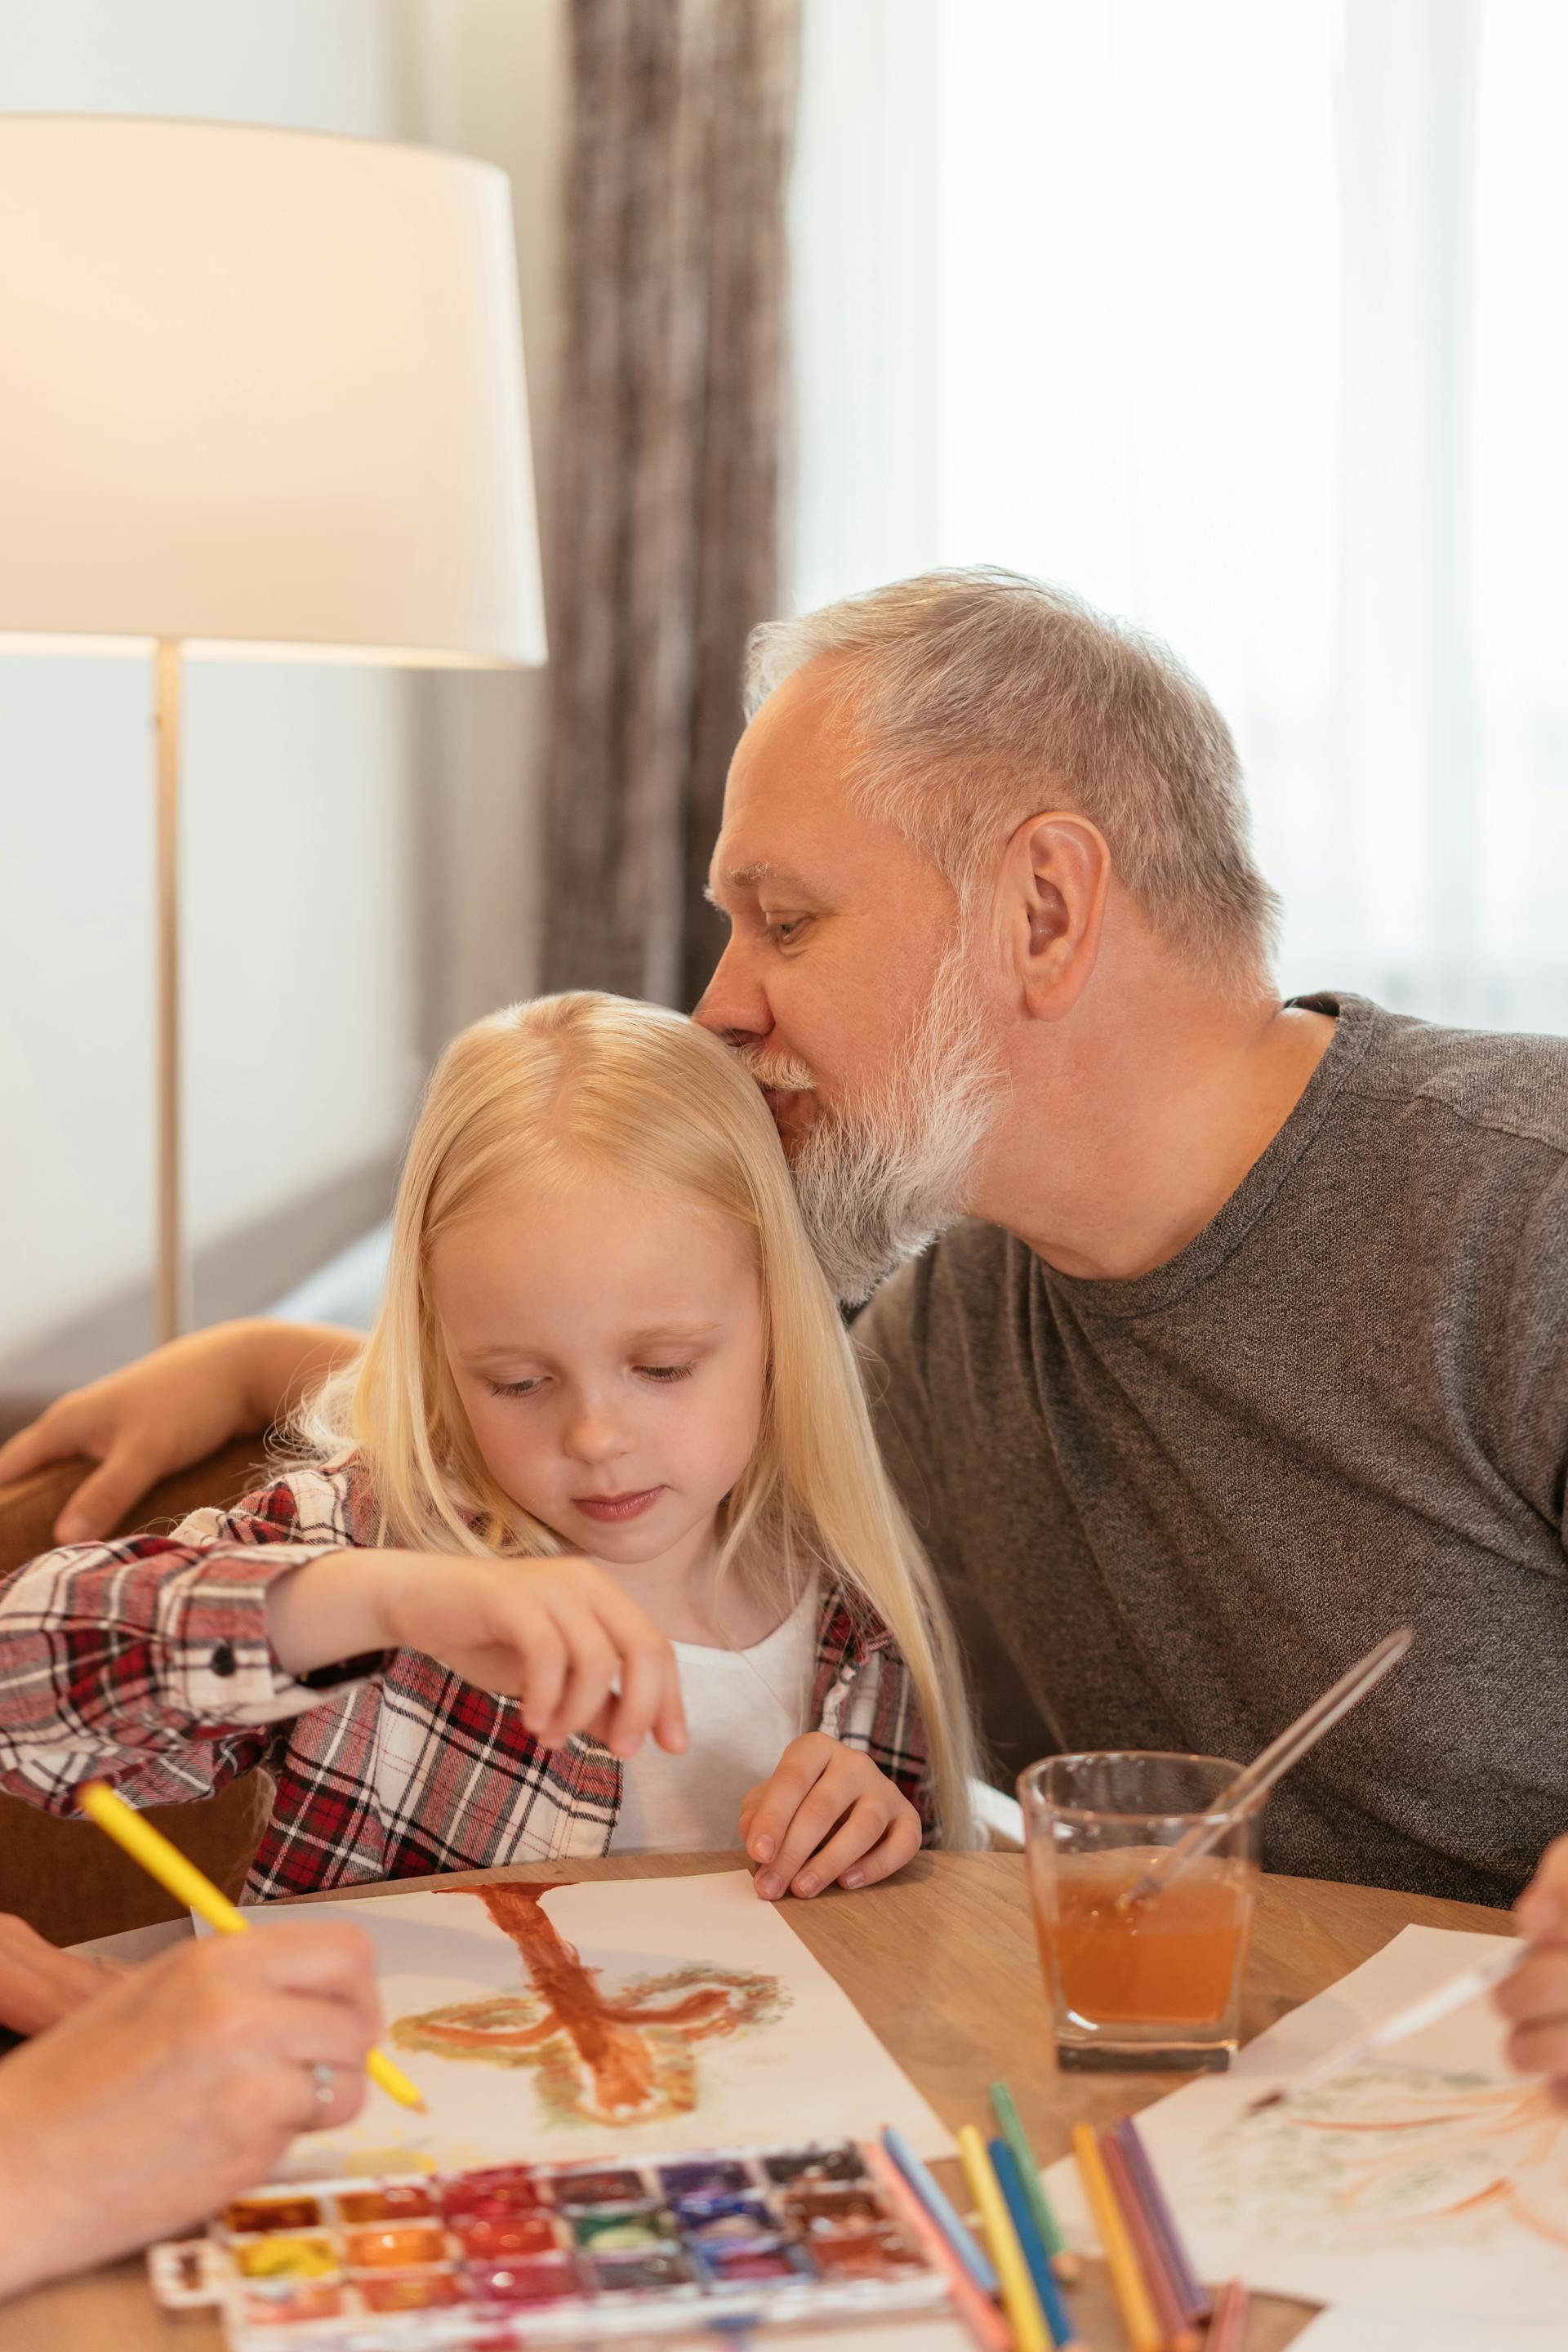 A grandfather kissing his granddaughter on the forehead | Source: Pexels